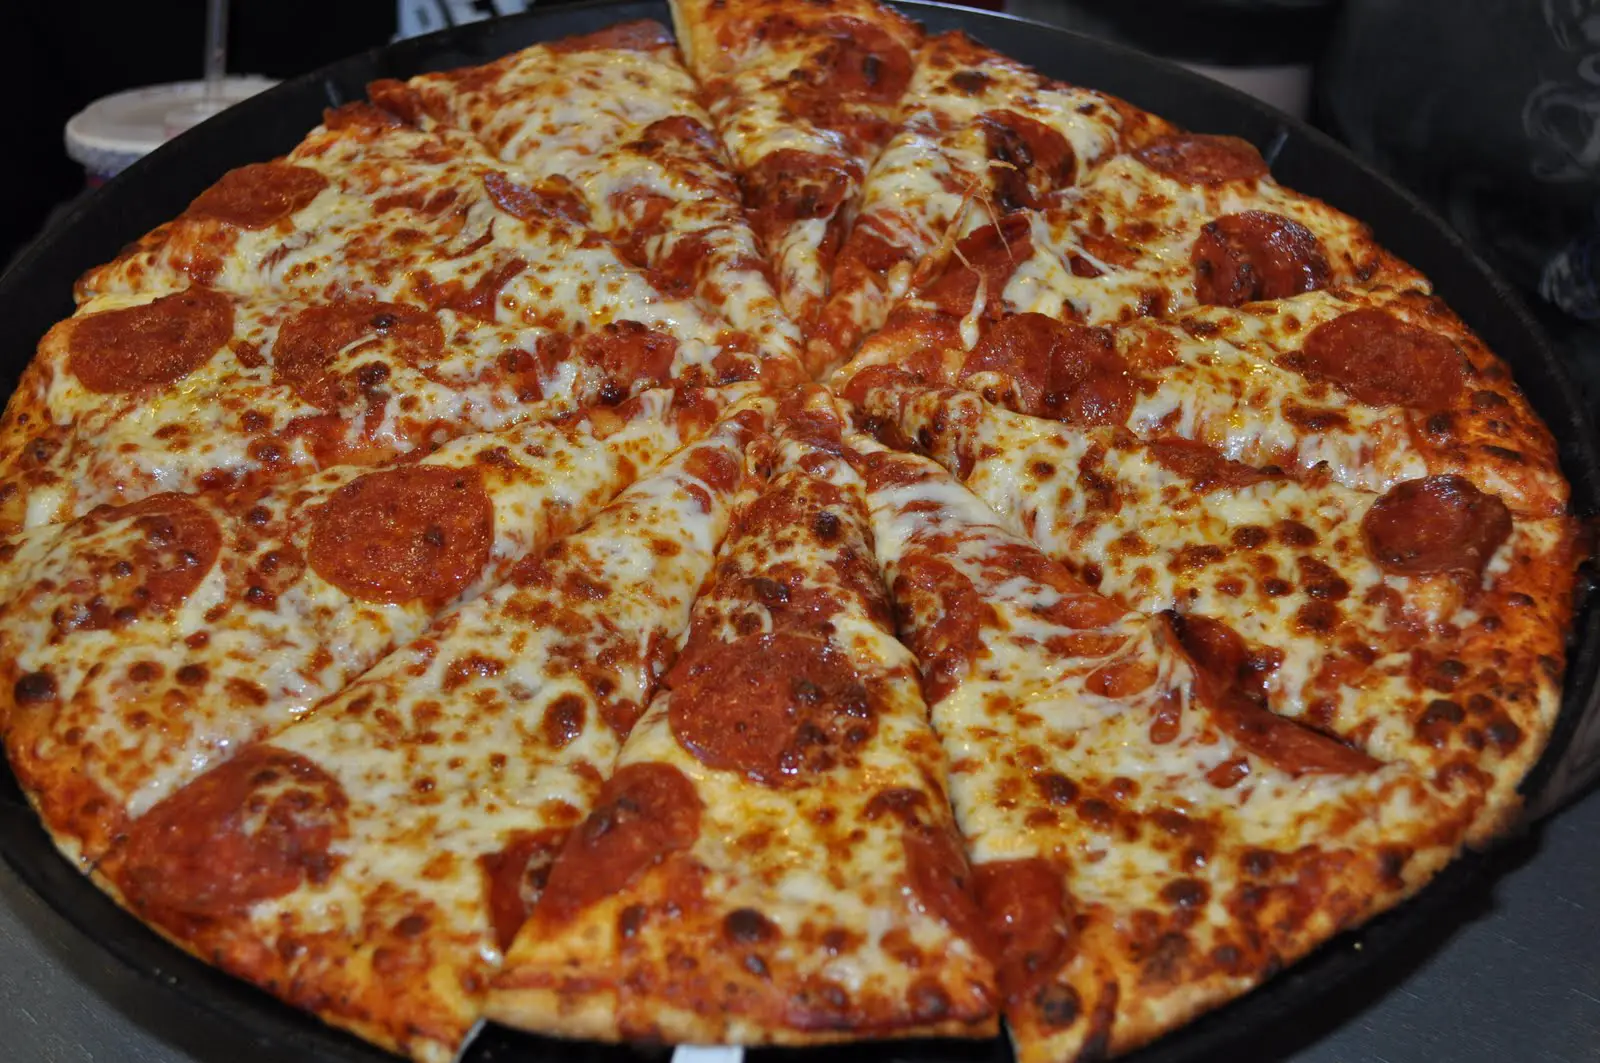 Hanging Off The Wire: Chuck E. Cheese Has New Pizza